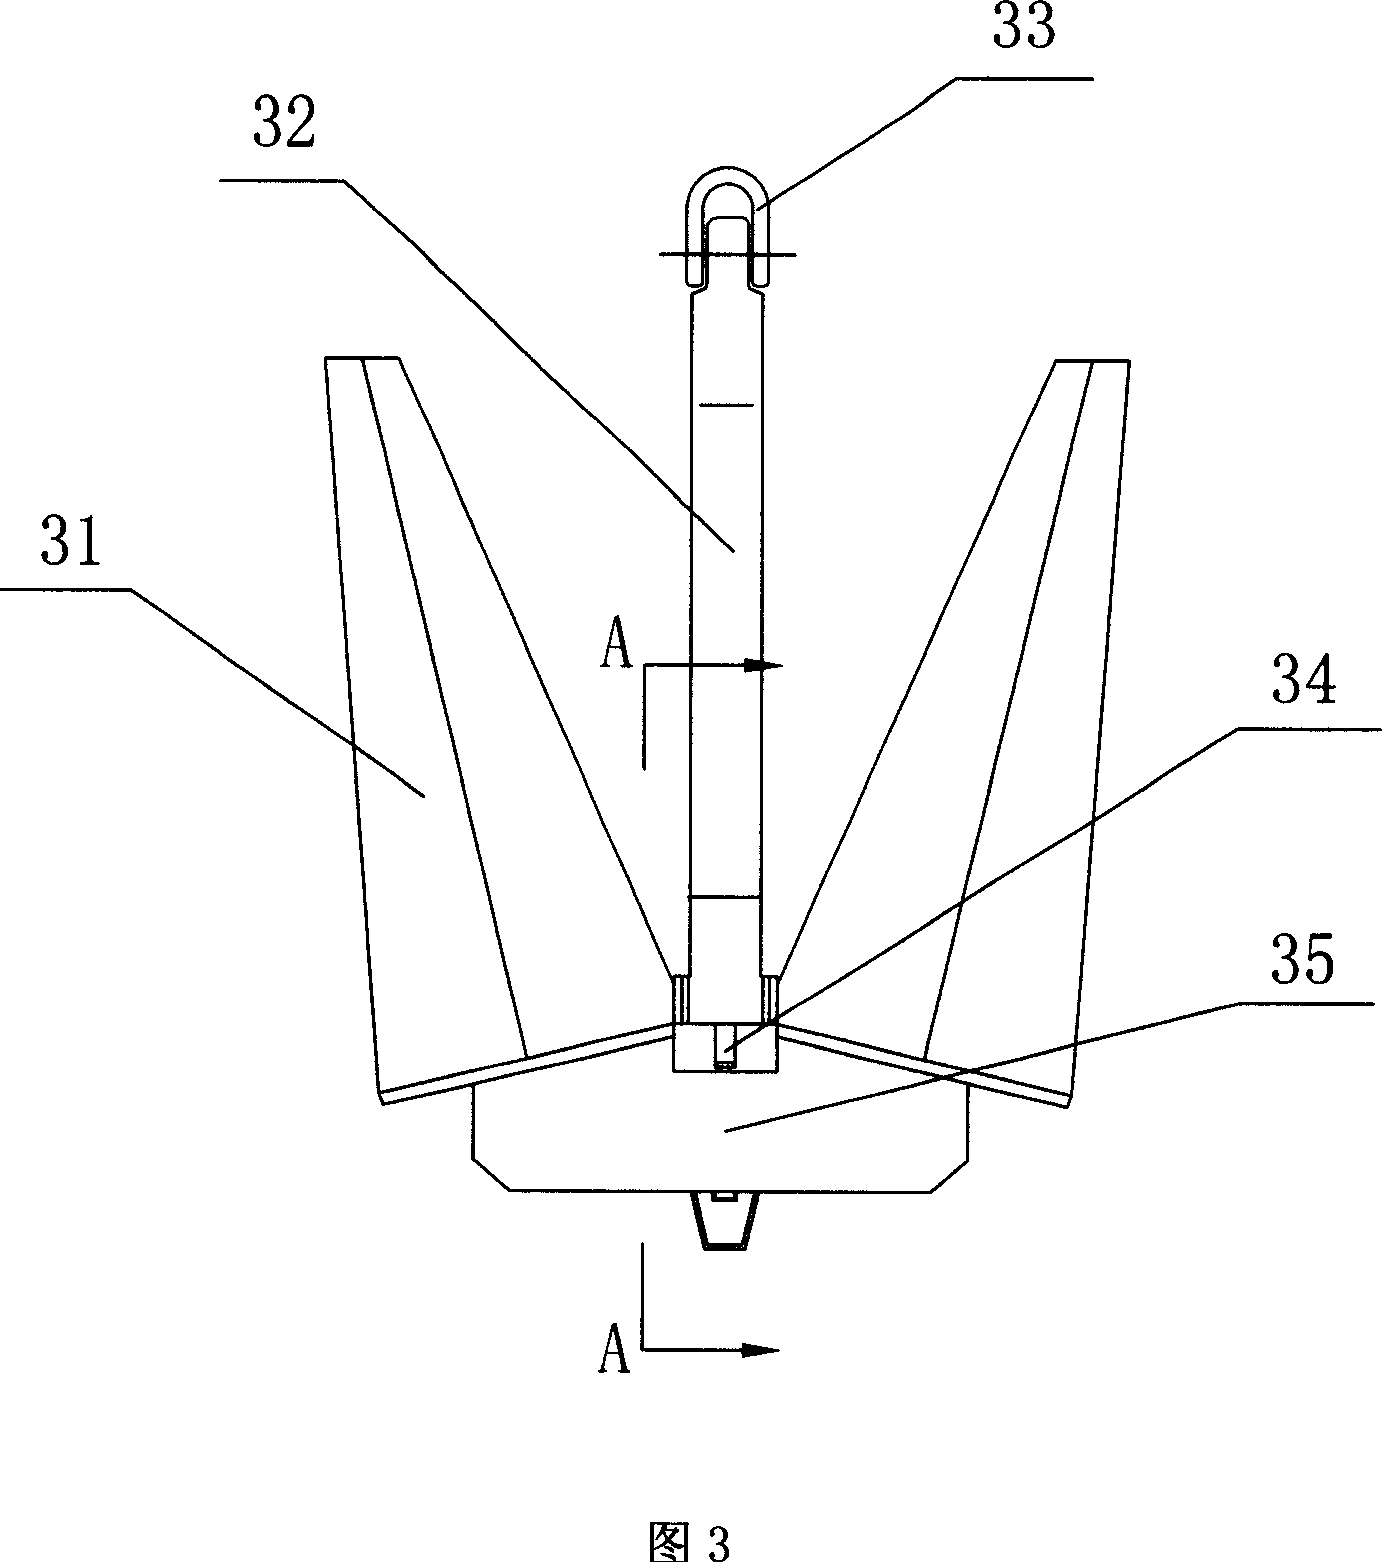 Anchor lip and single bow anchor matching structure for high-speed ship